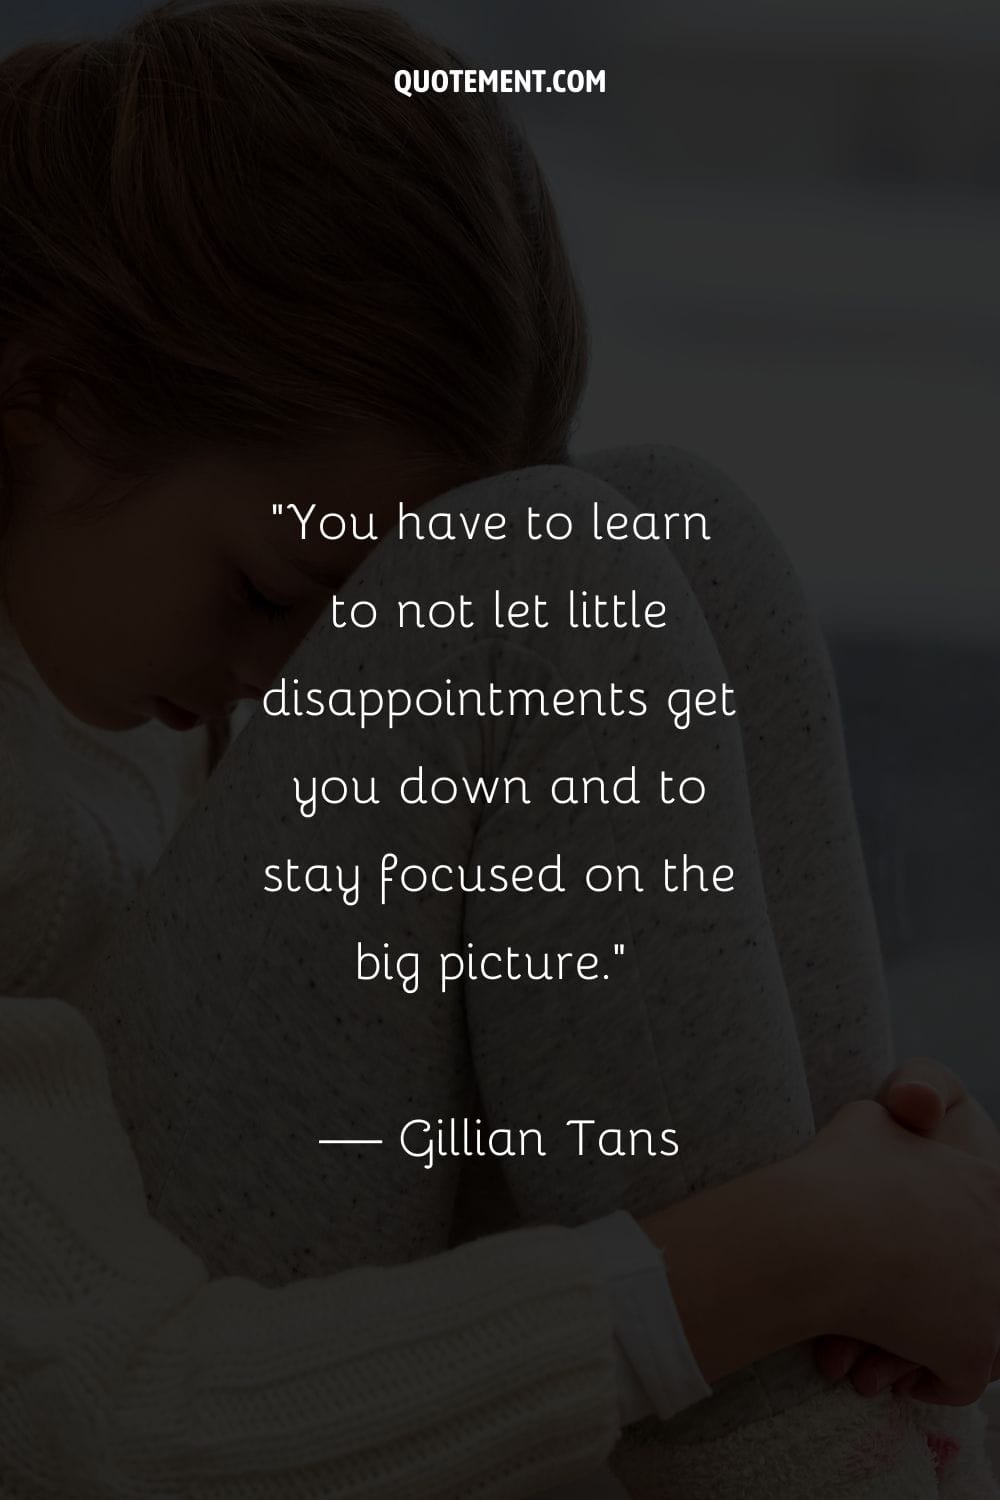 You have to learn to not let little disappointments get you down and to stay focused on the big picture